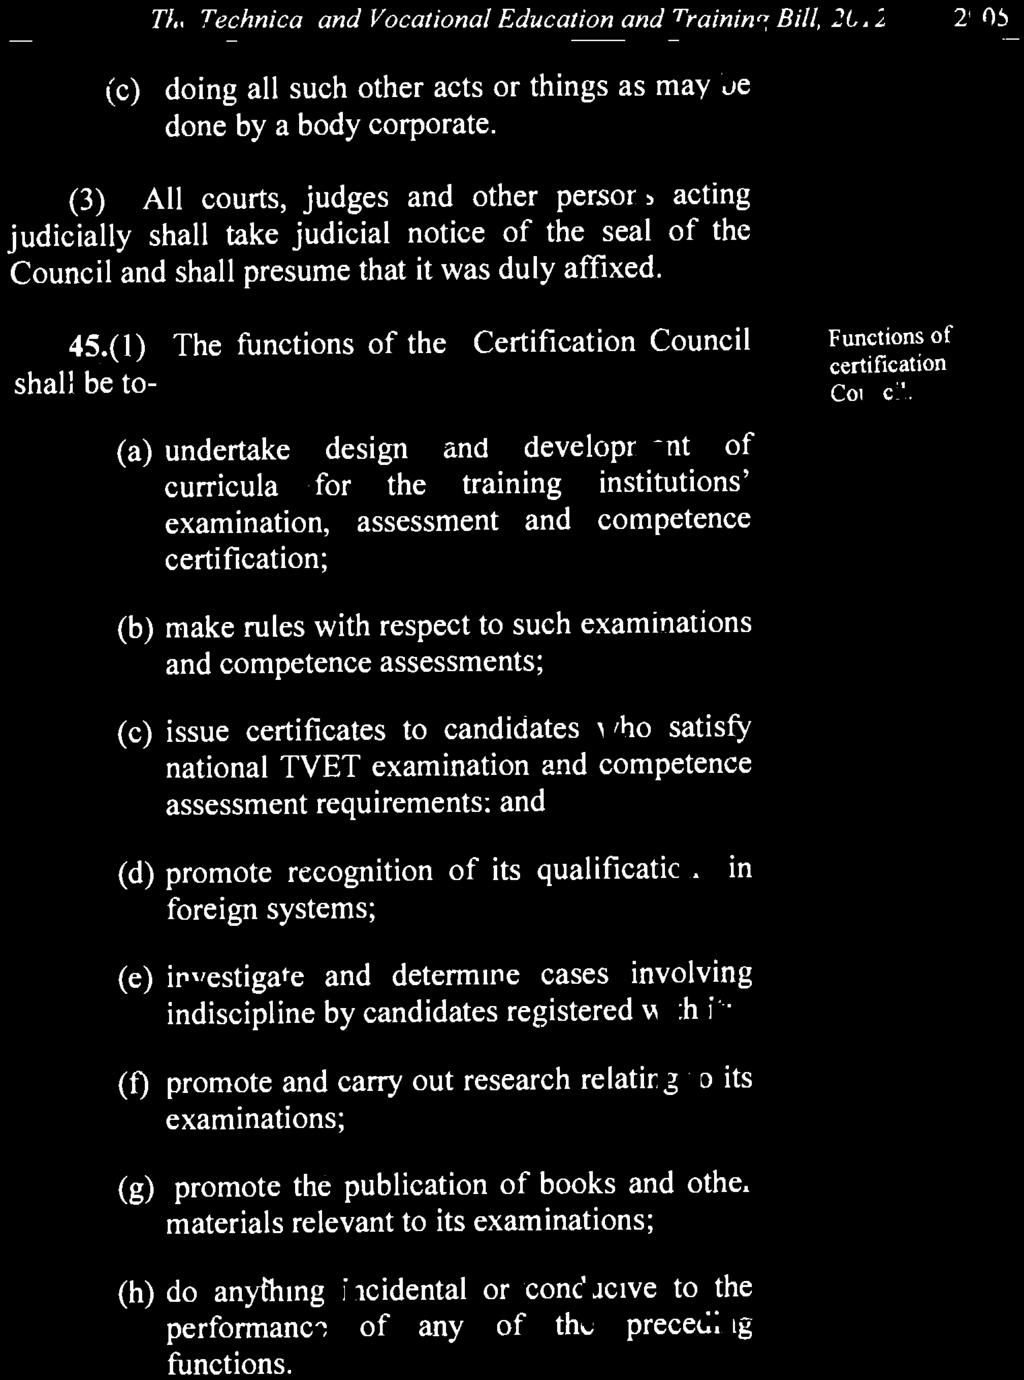 (b) make rules with respect to such examinations and competence assessments; (c) issue certificates to candidates who satisfy national TVET